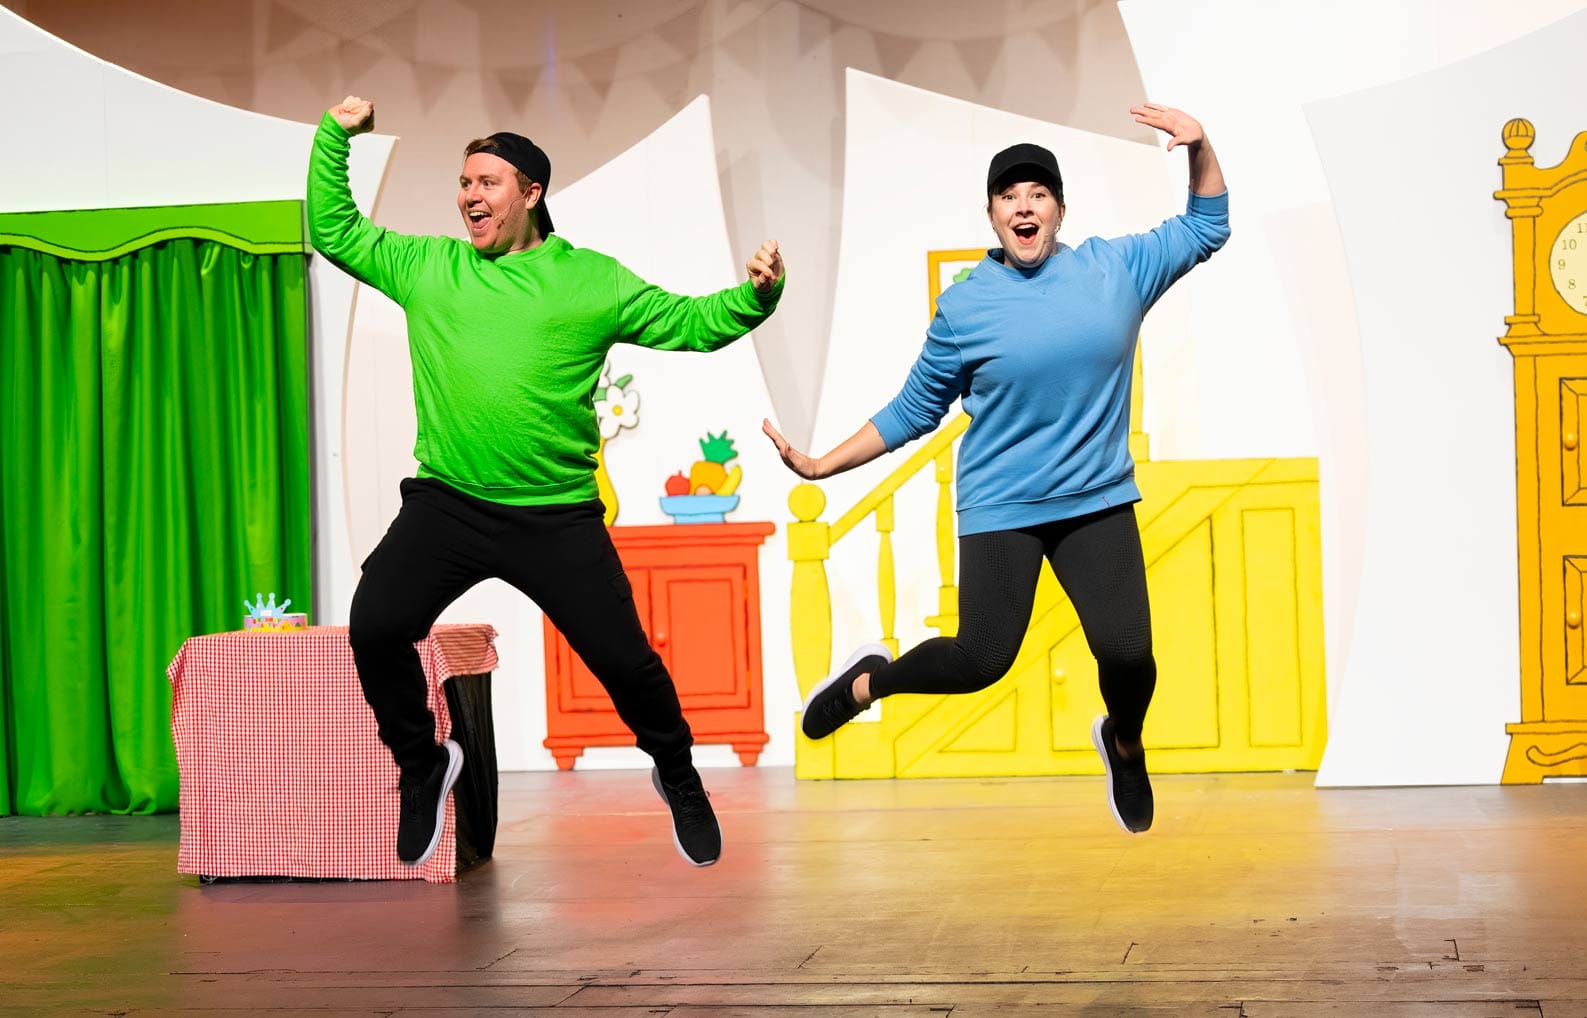 Two of the characters in the show are captured joyfully mid jumping. One is wearing green and the other is in blue.